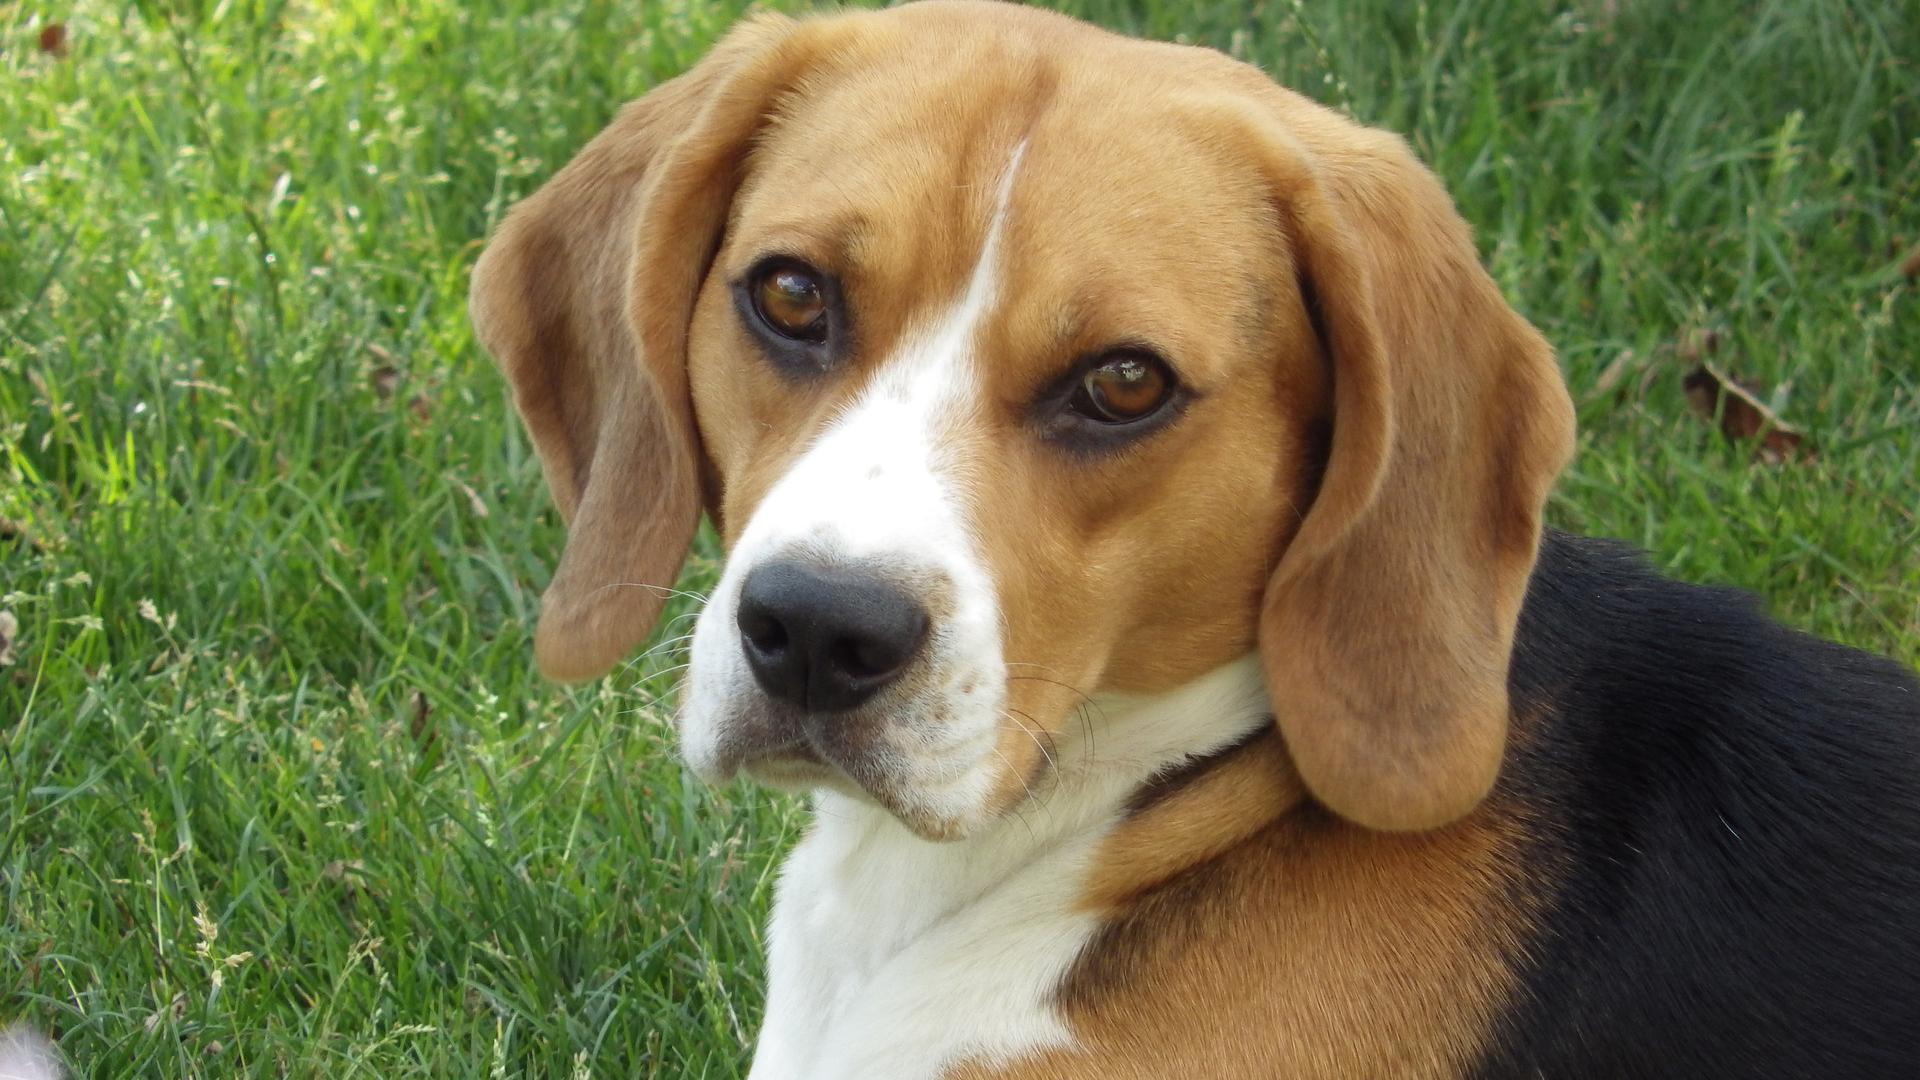 Beagles are the most commonly used dog breed in research, according to animal advocacy group the Beagle Freedom Project.